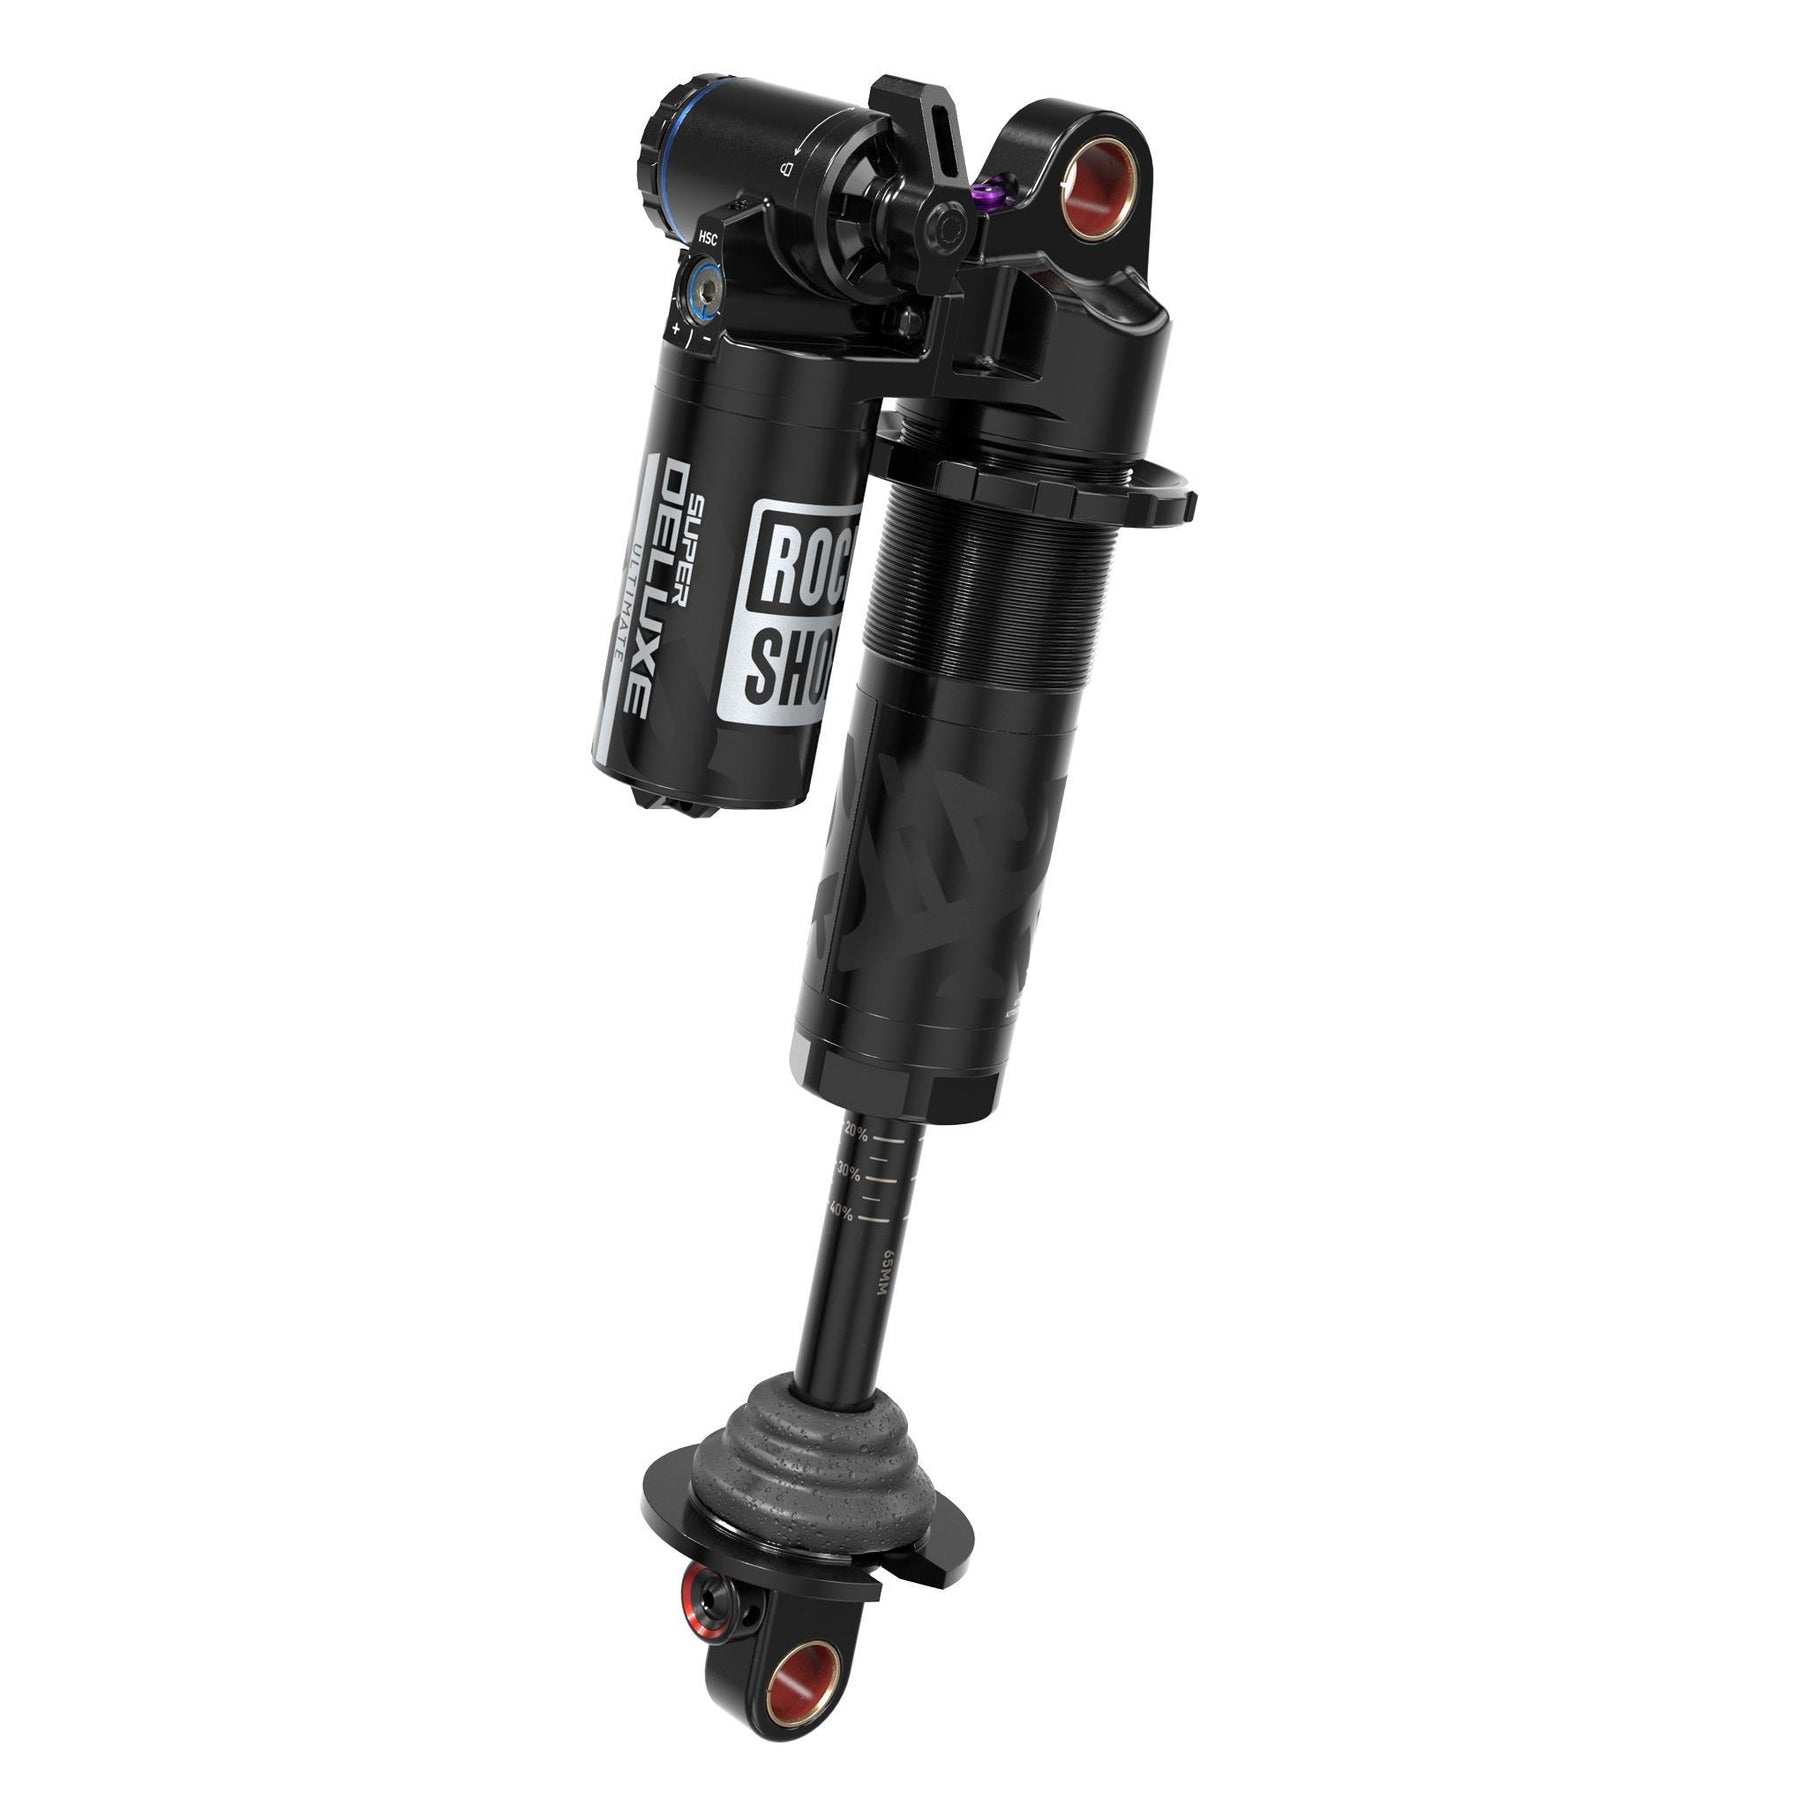 Rockshox Super Deluxe Coil Ultimate Rear Shock RC2T - Linearreb/Lcomp, 320LB Lockout, Hydraulic Bottom Out, Bearing Standard(Spring Sold Separate) B1 Santa Cruz Nomad 5 2021+ Black 230X62.5